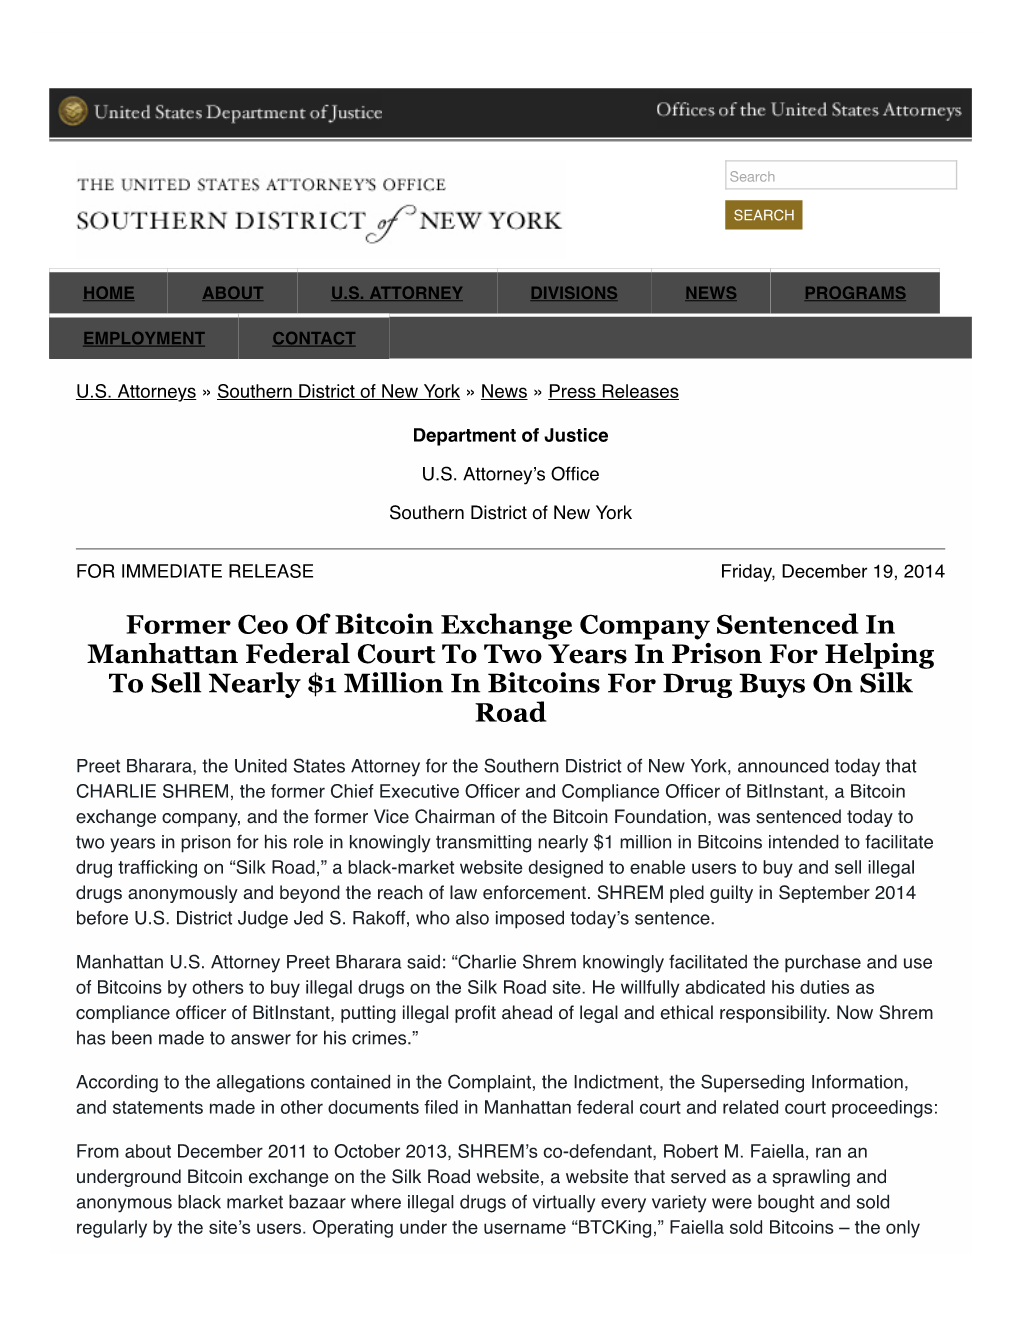 Former Ceo of Bitcoin Exchange Company Sentenced in Manhattan